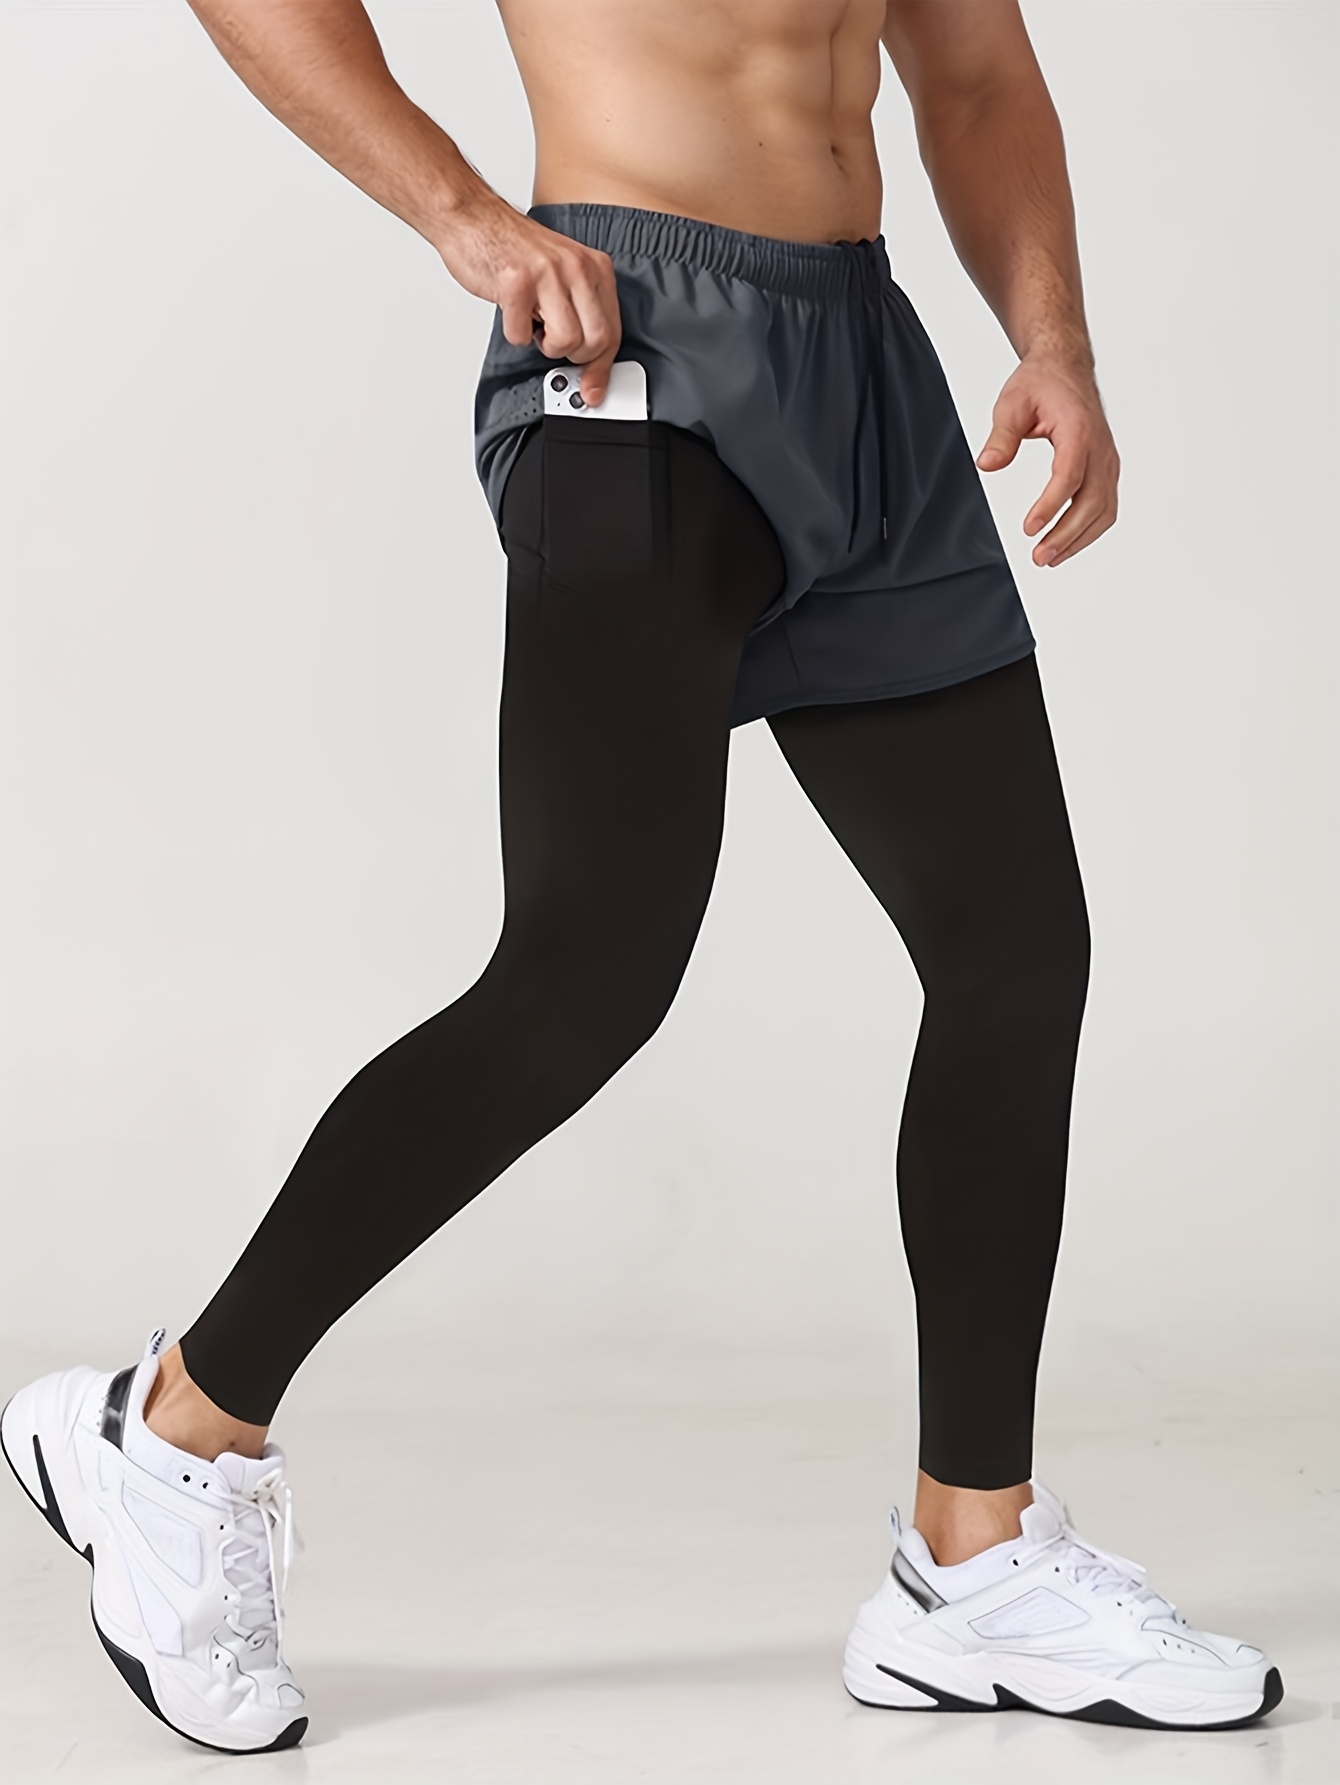 Running Shorts Mens Leggings and shorts 2 in 1 Double layer Gym Fitness  Sports Shorts with Pocket